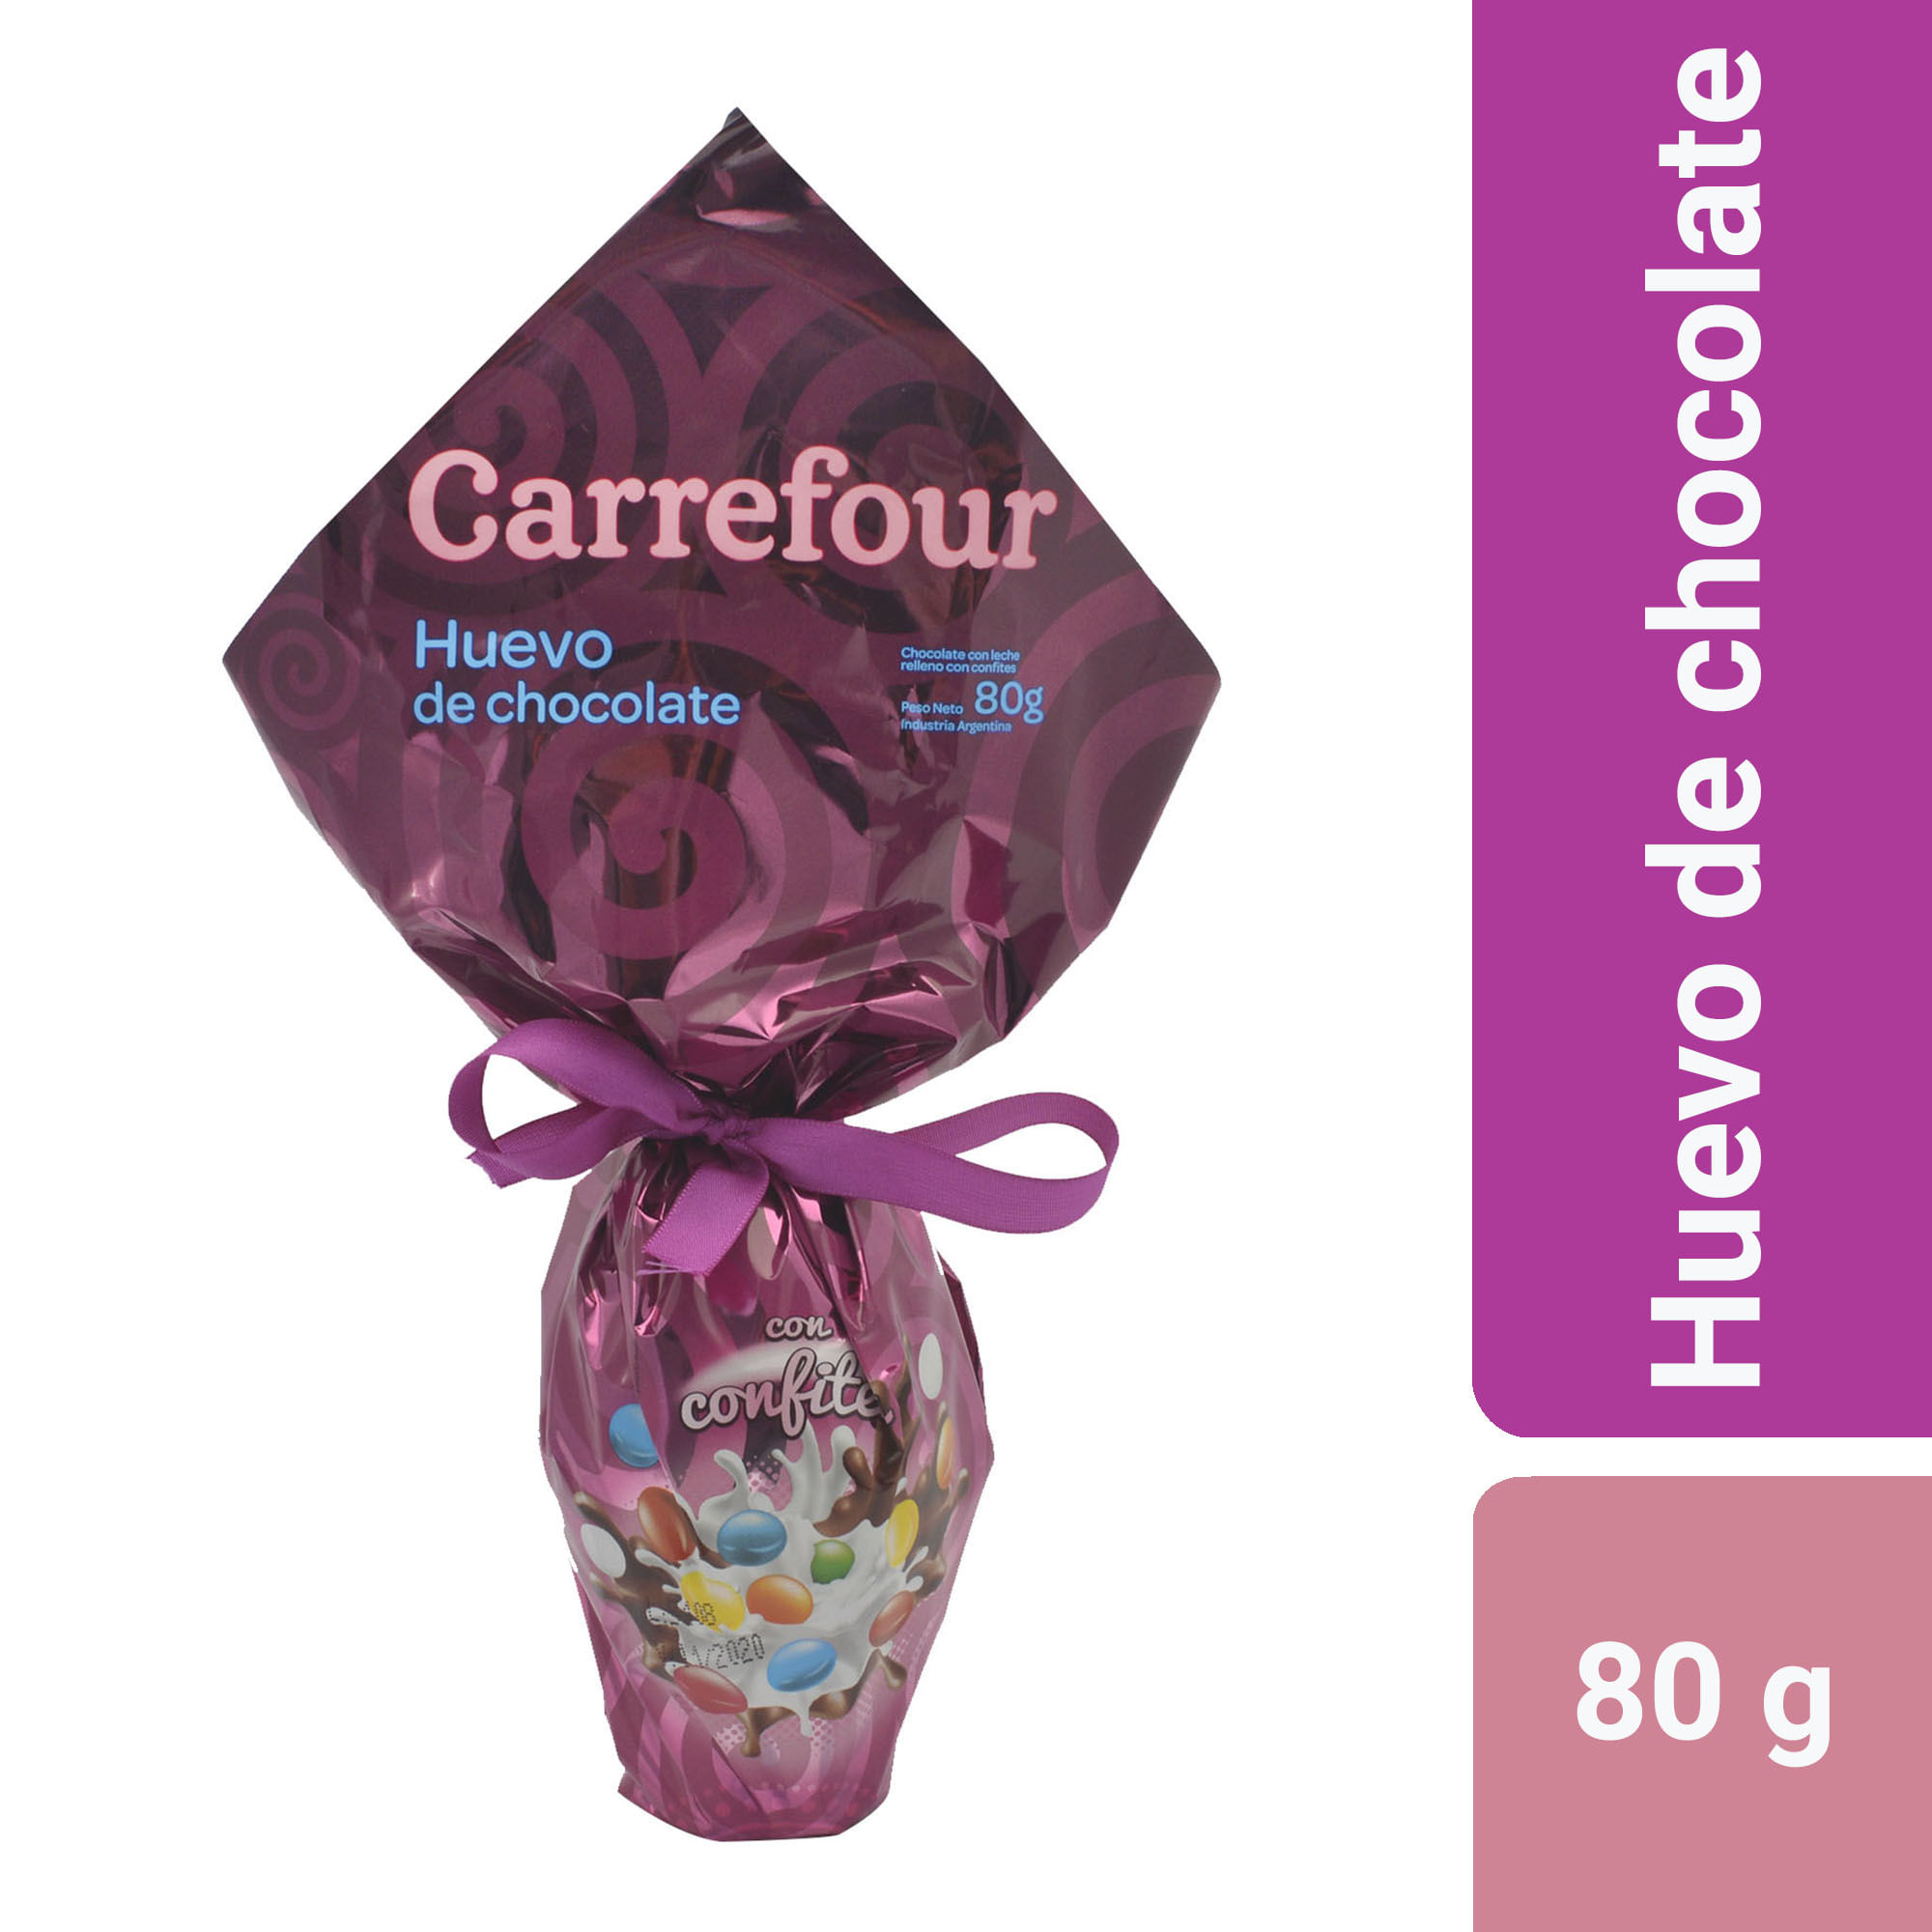 Carrefour chocolate leche 80 g. Carrefour